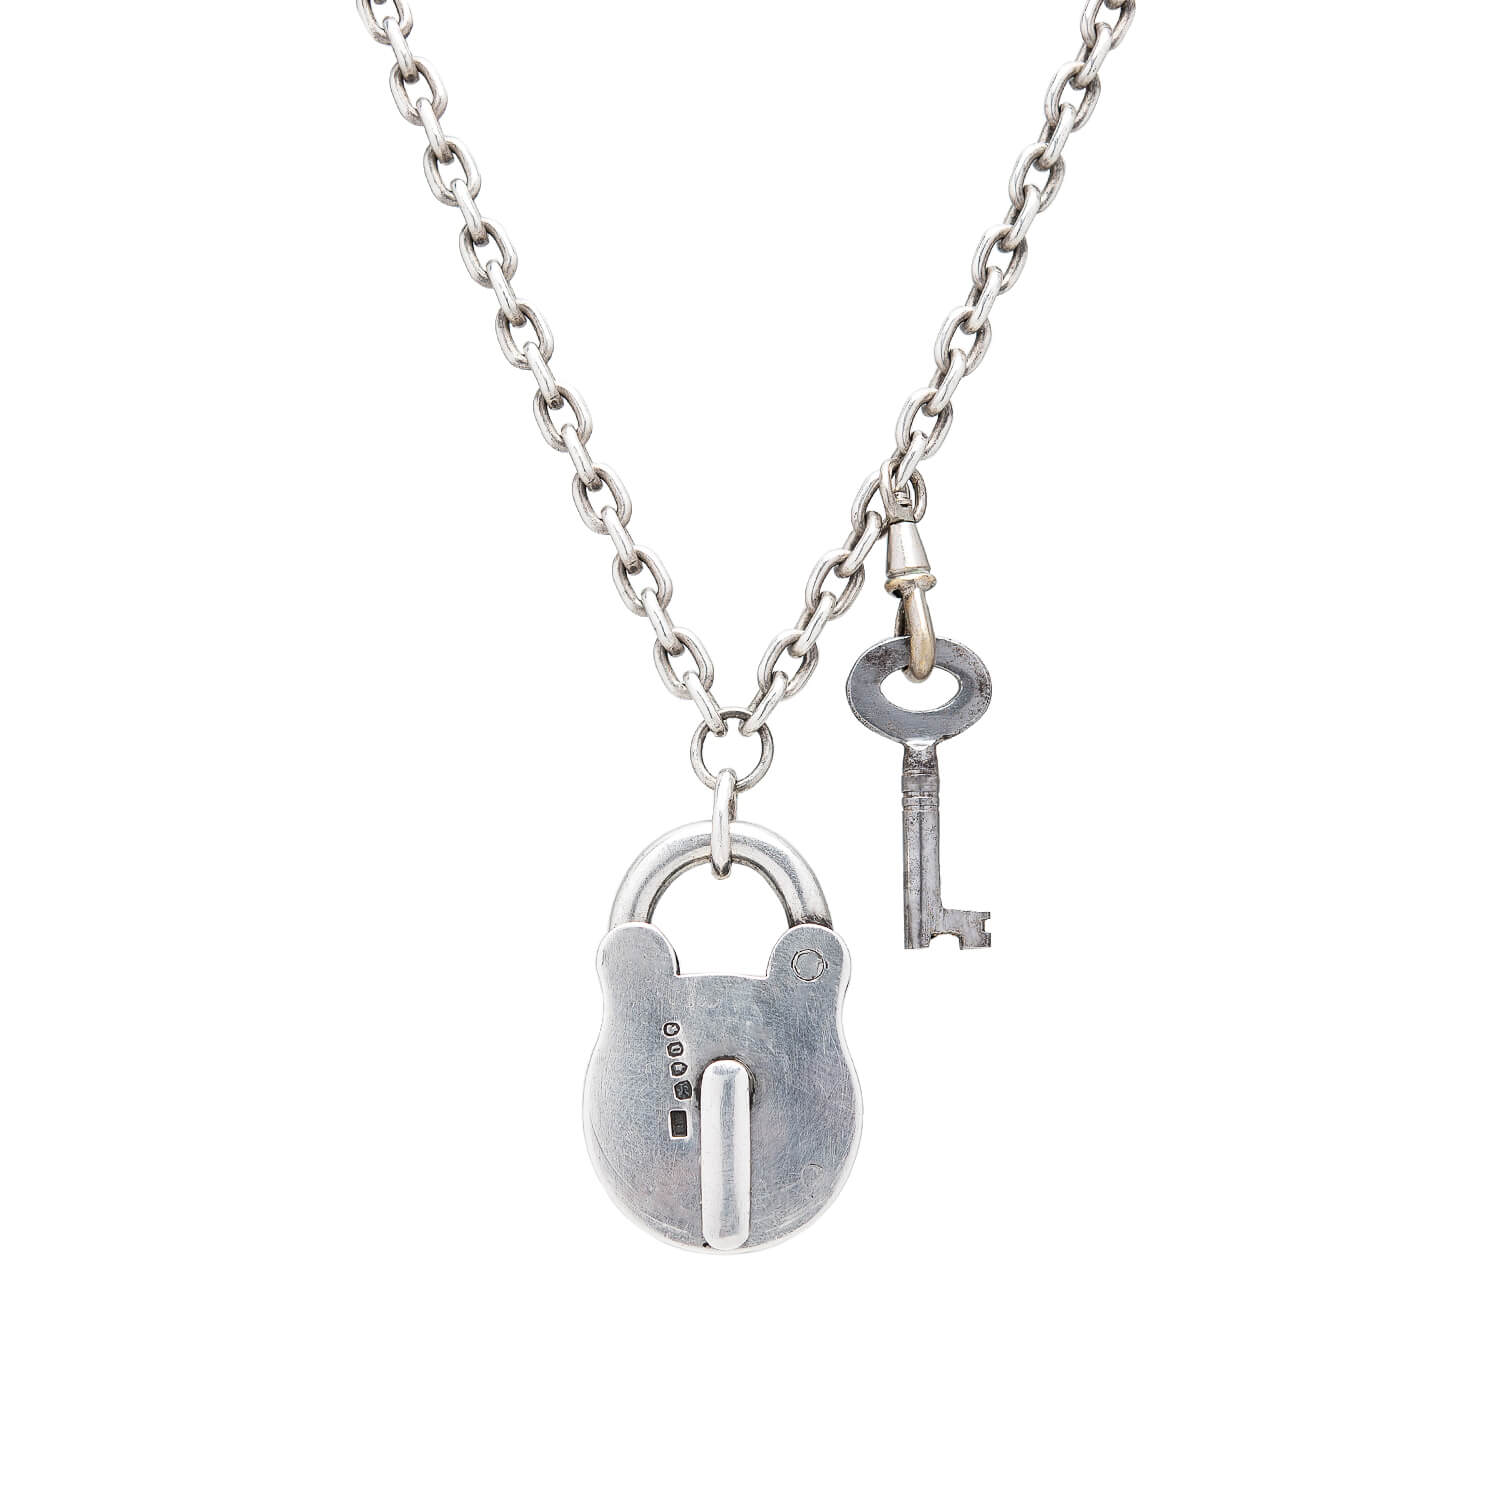 Silver Chain Necklace With Silver Lock/ Padlock Charm Lock 